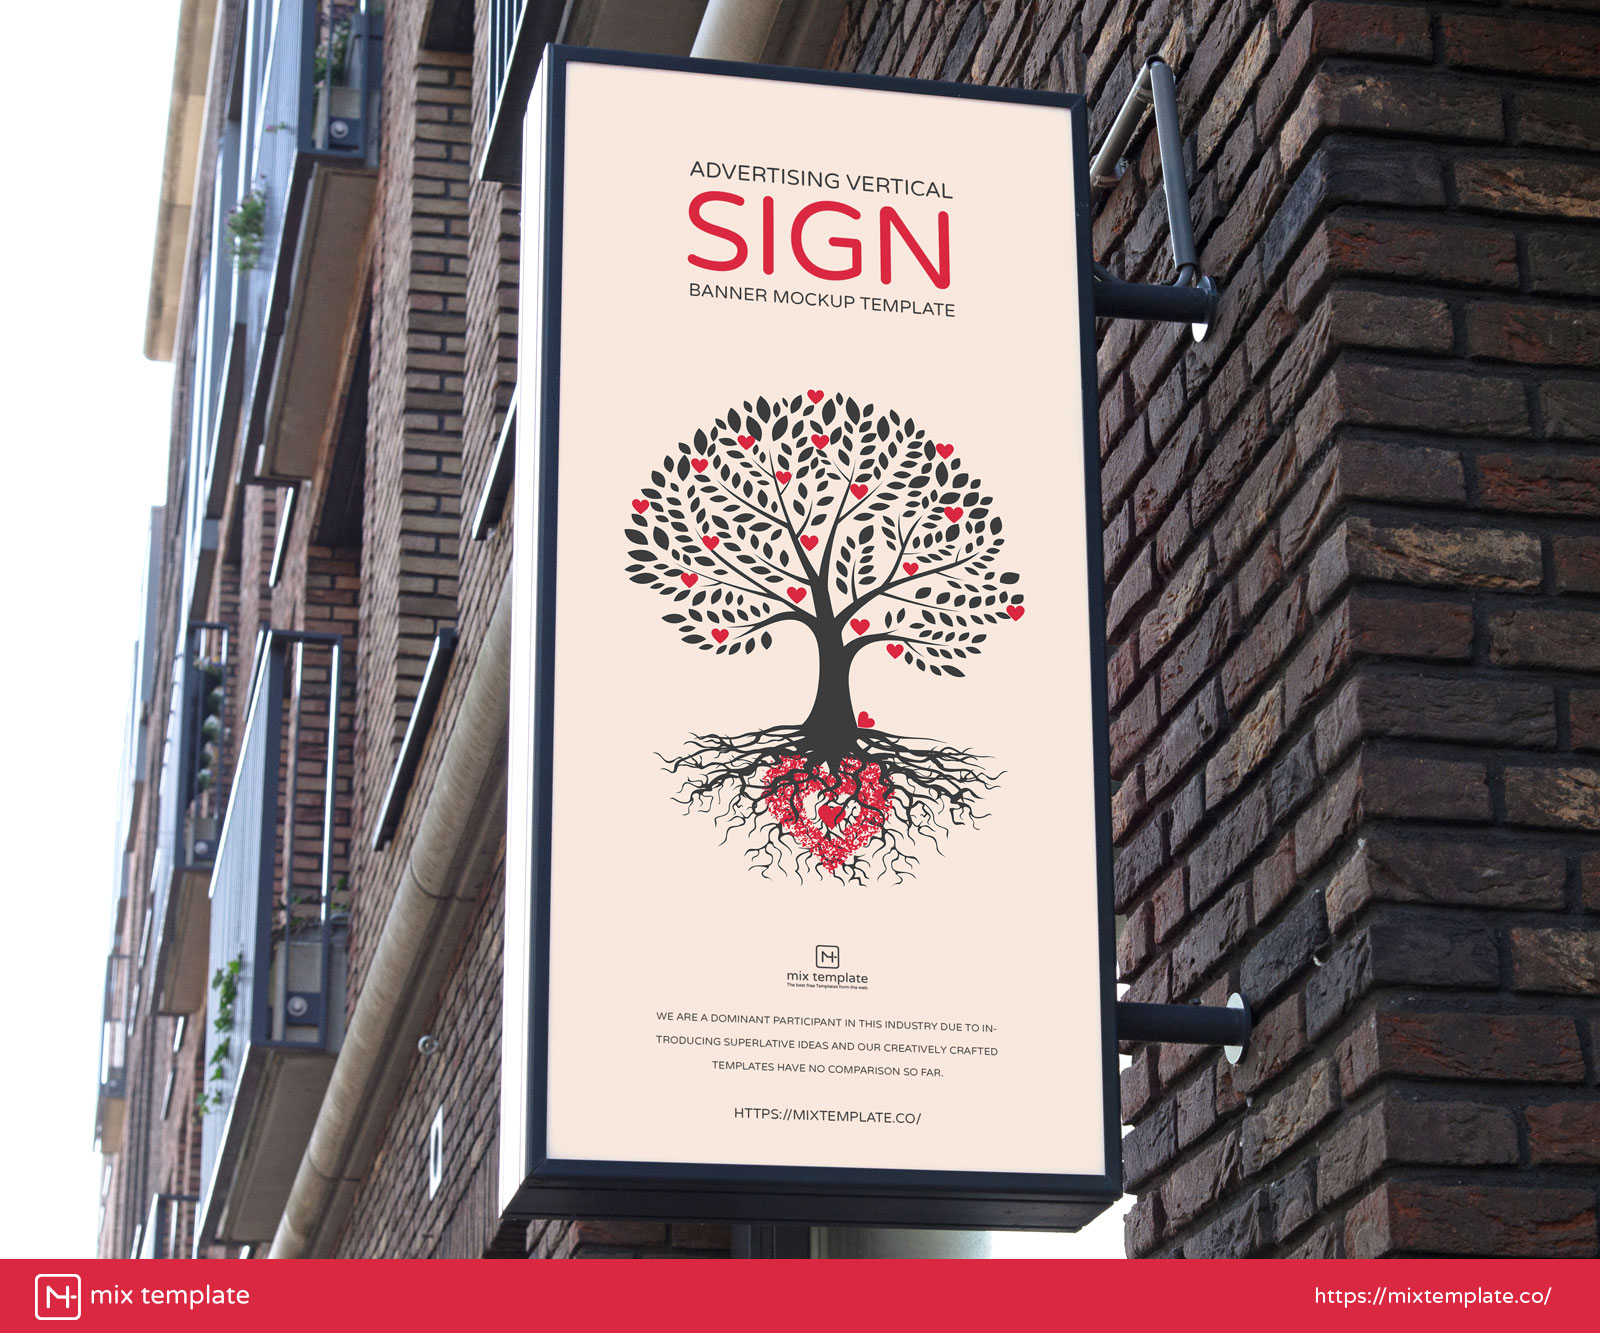 Free-Advertising-Vertical-Sign-Banner-Mockup-Template-38